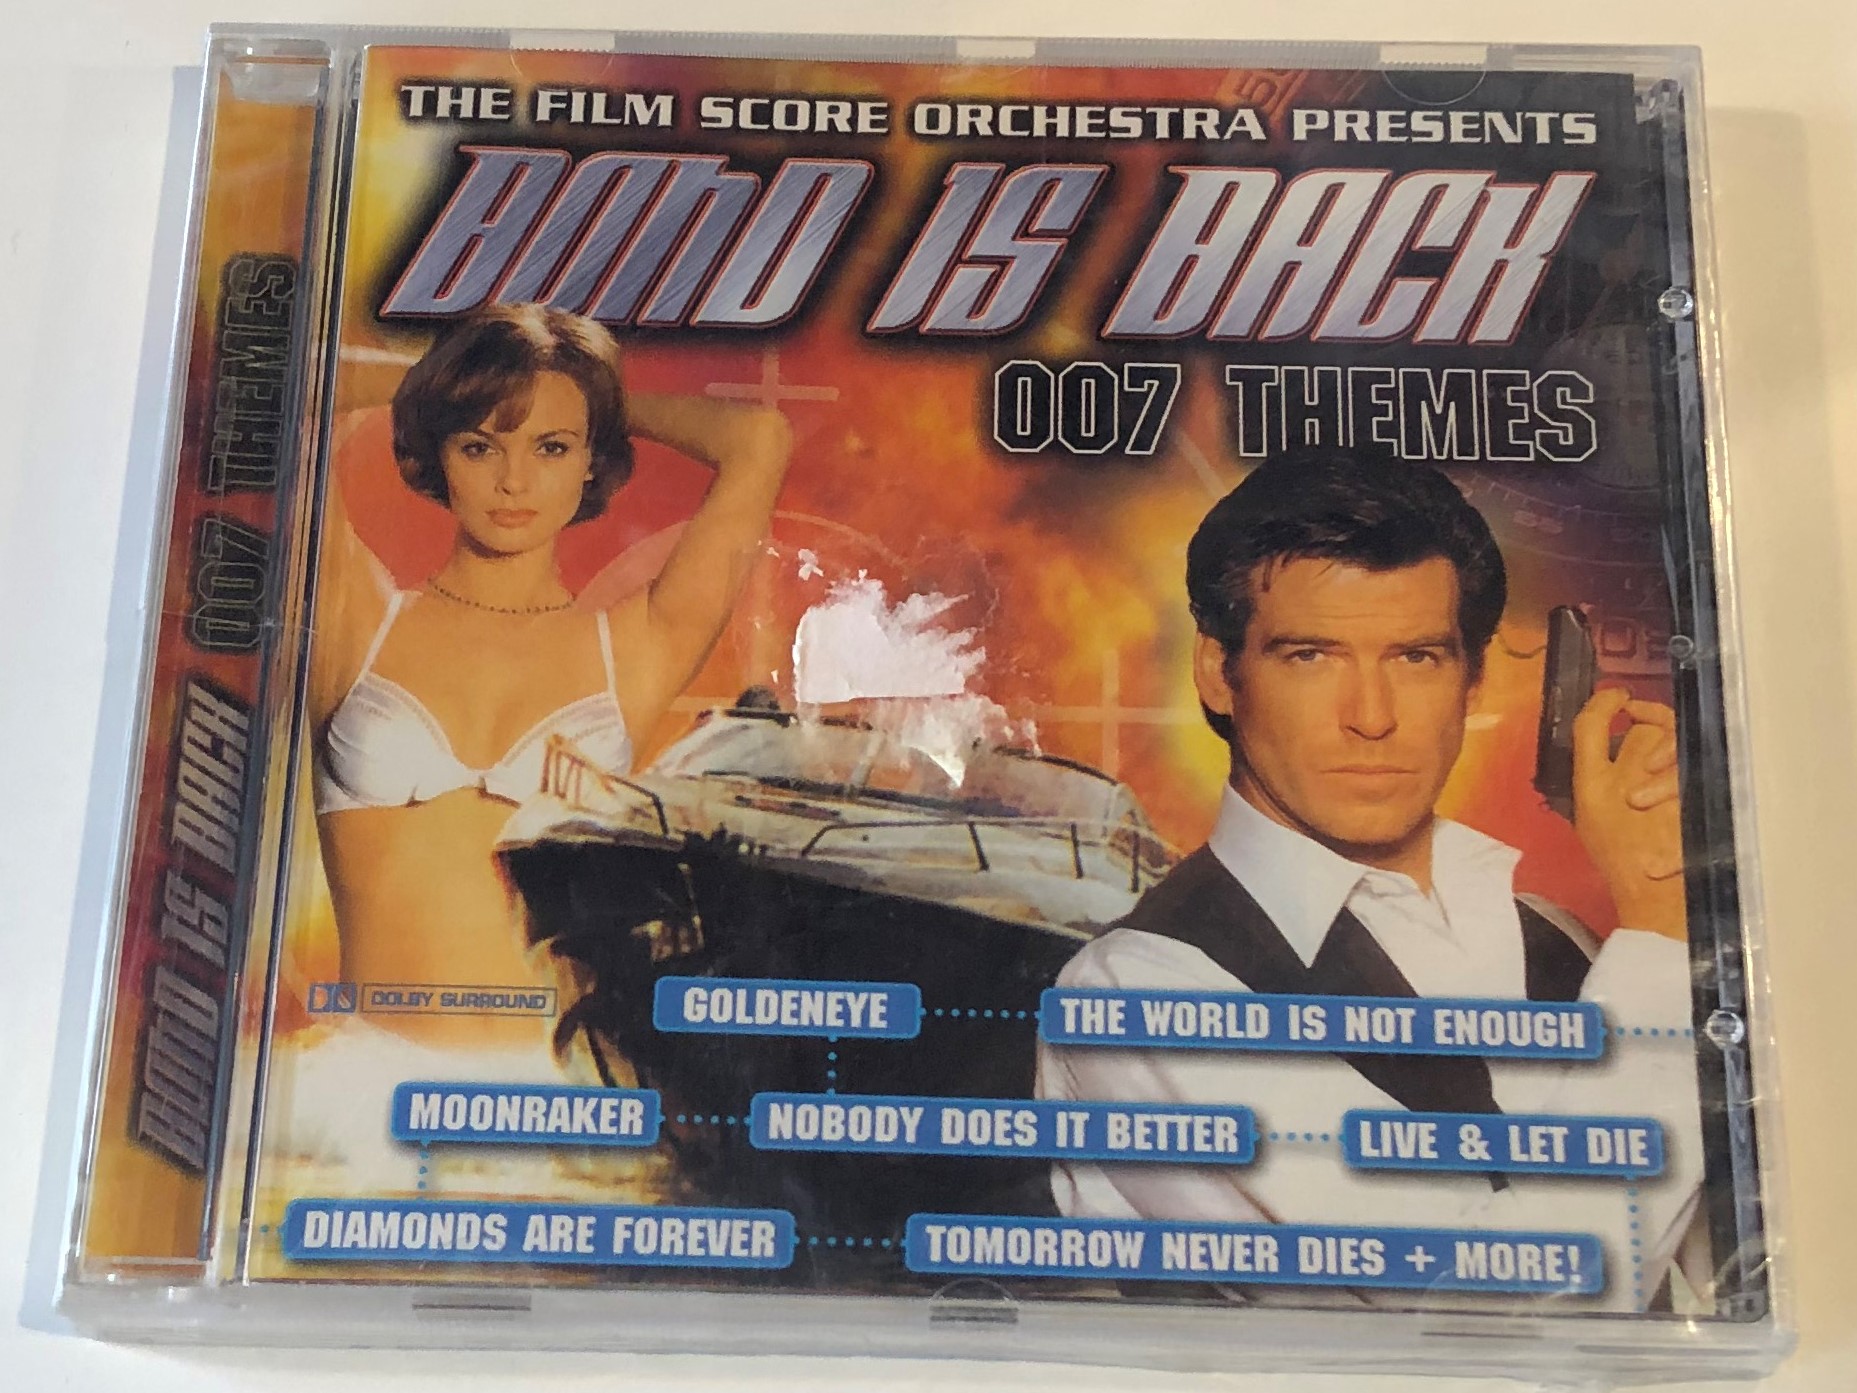 the-film-score-orchestra-presents-bond-is-back-007-themes-goldeneye-the-world-is-not-enough-moonraker-nobody-does-it-better-live-let-die-diamonds-are-forever-tomorrow-never-dies-mor-1-.jpg